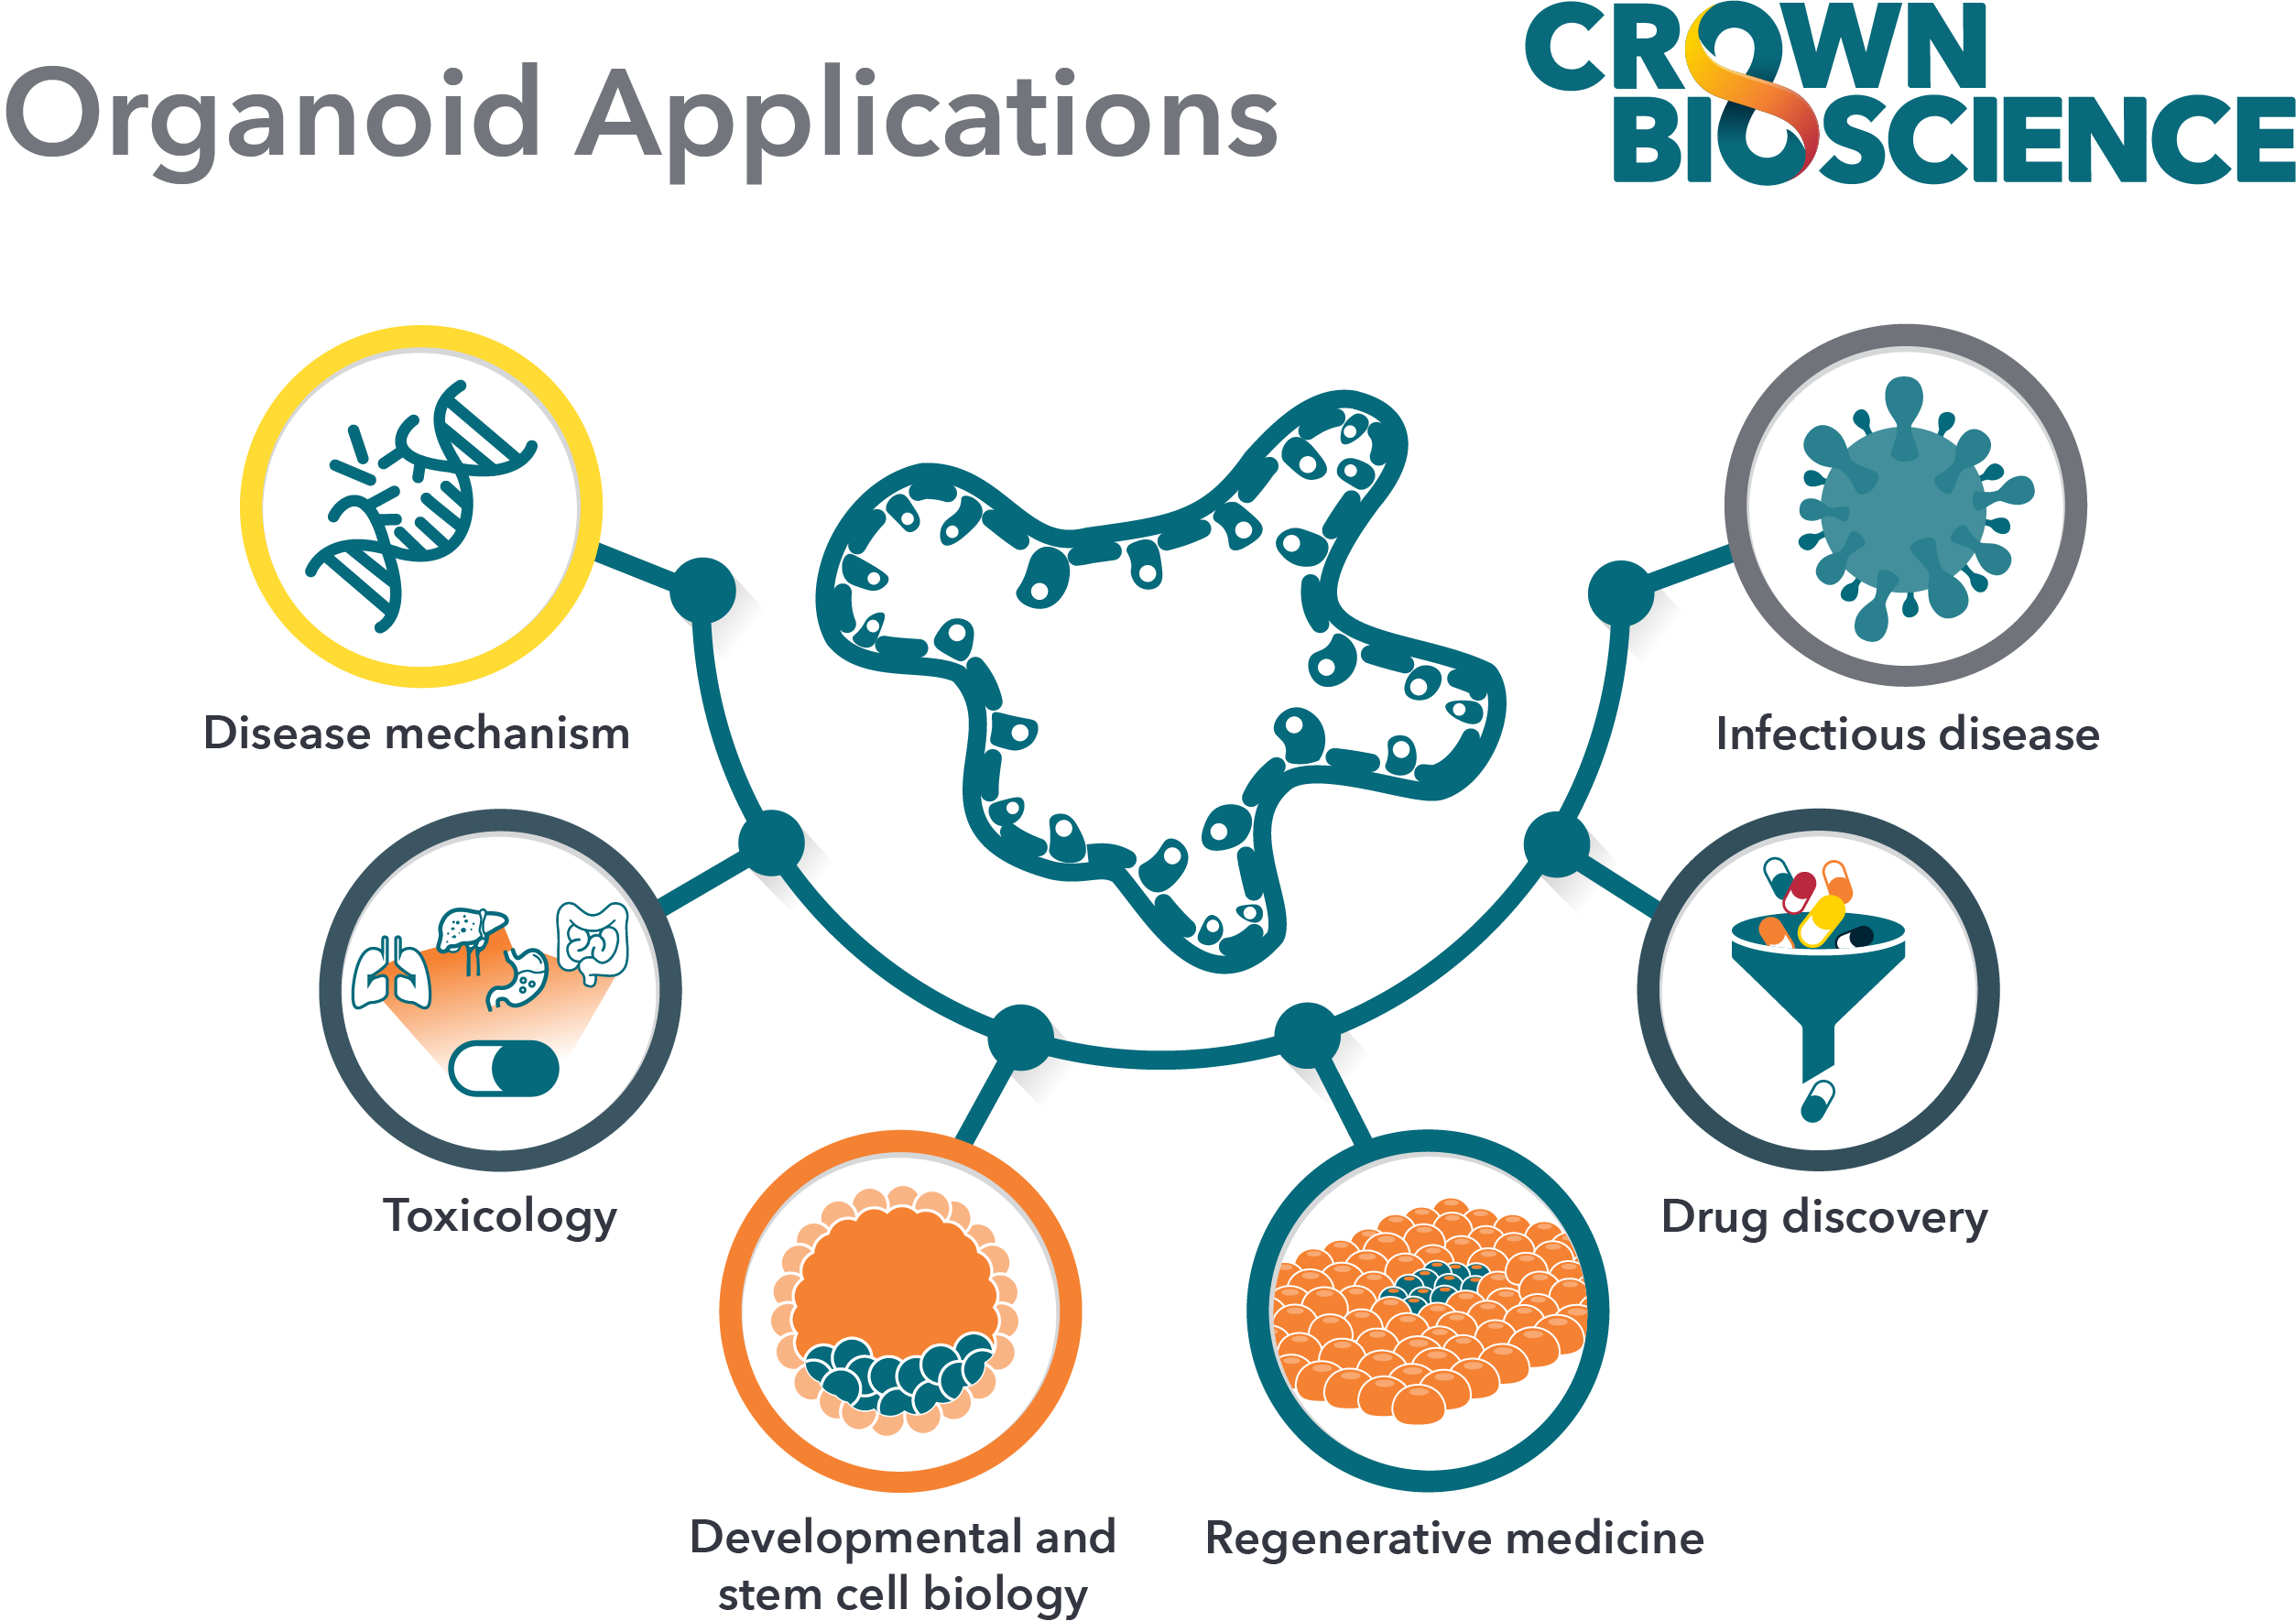 graphic of organoid applications including drug discovery, toxicology, stem cell biology, regenerative medicine, studying disease mechanisms